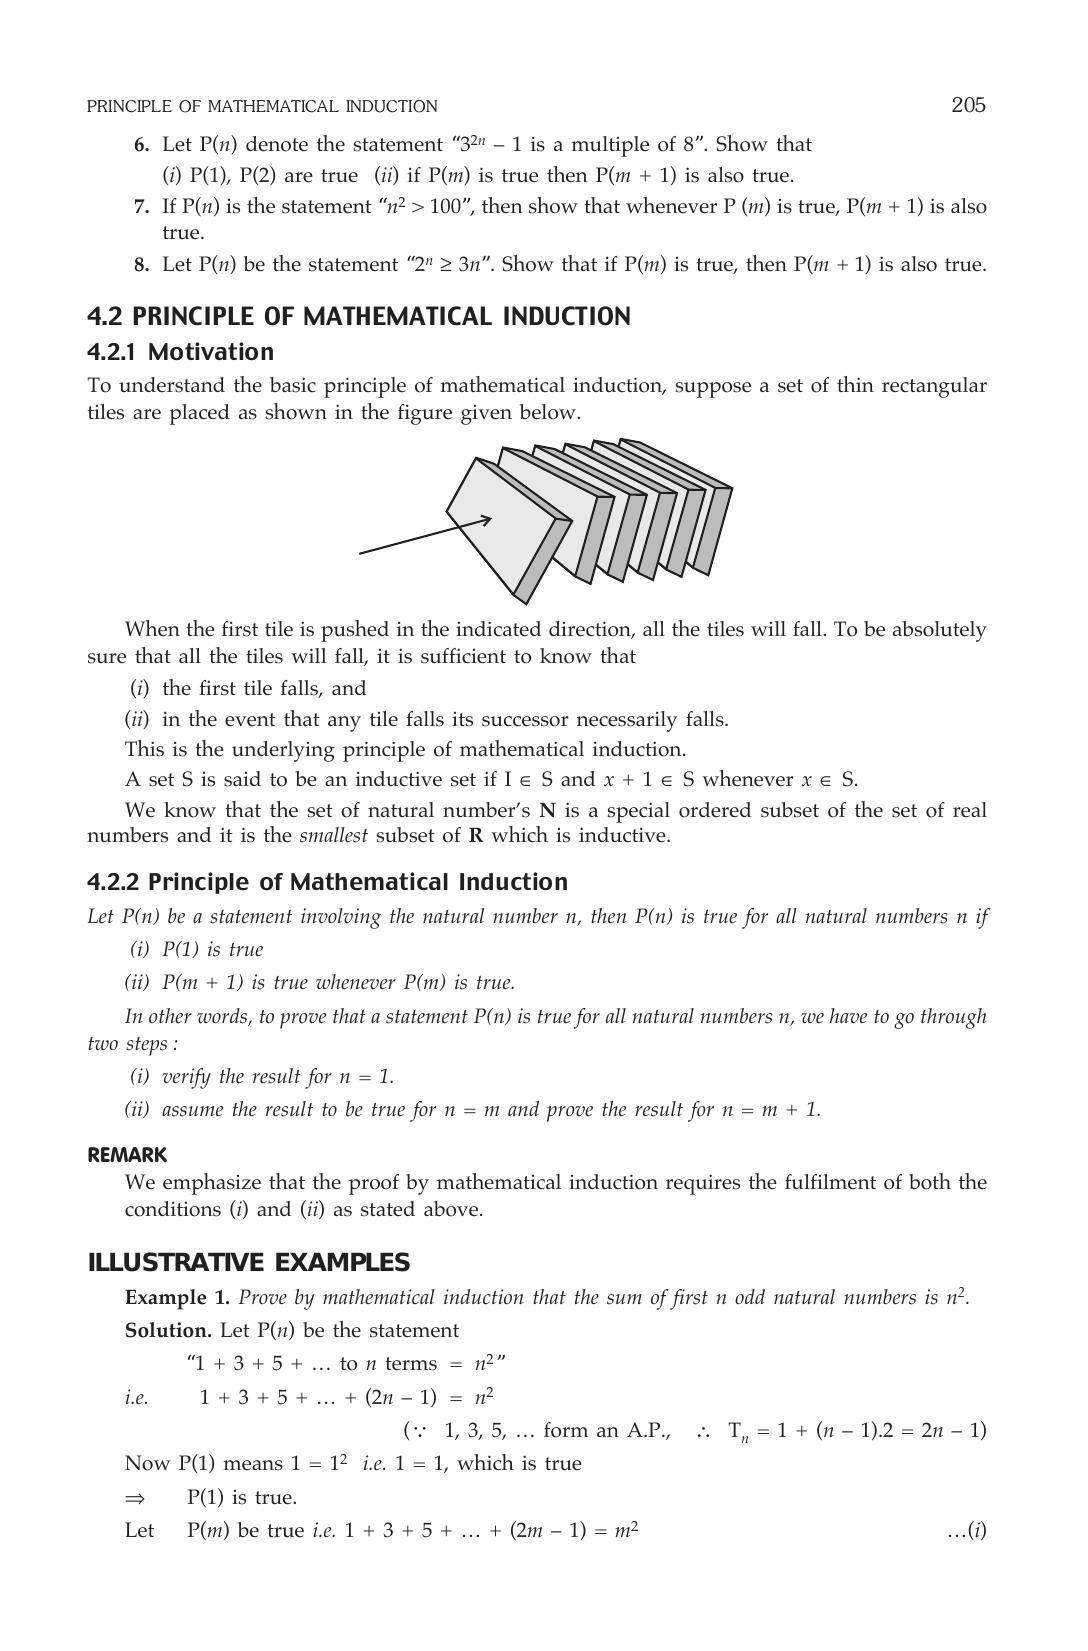 ML Aggarwal Class 11 Solutions: Principle of Mathematical Induction - Page 3